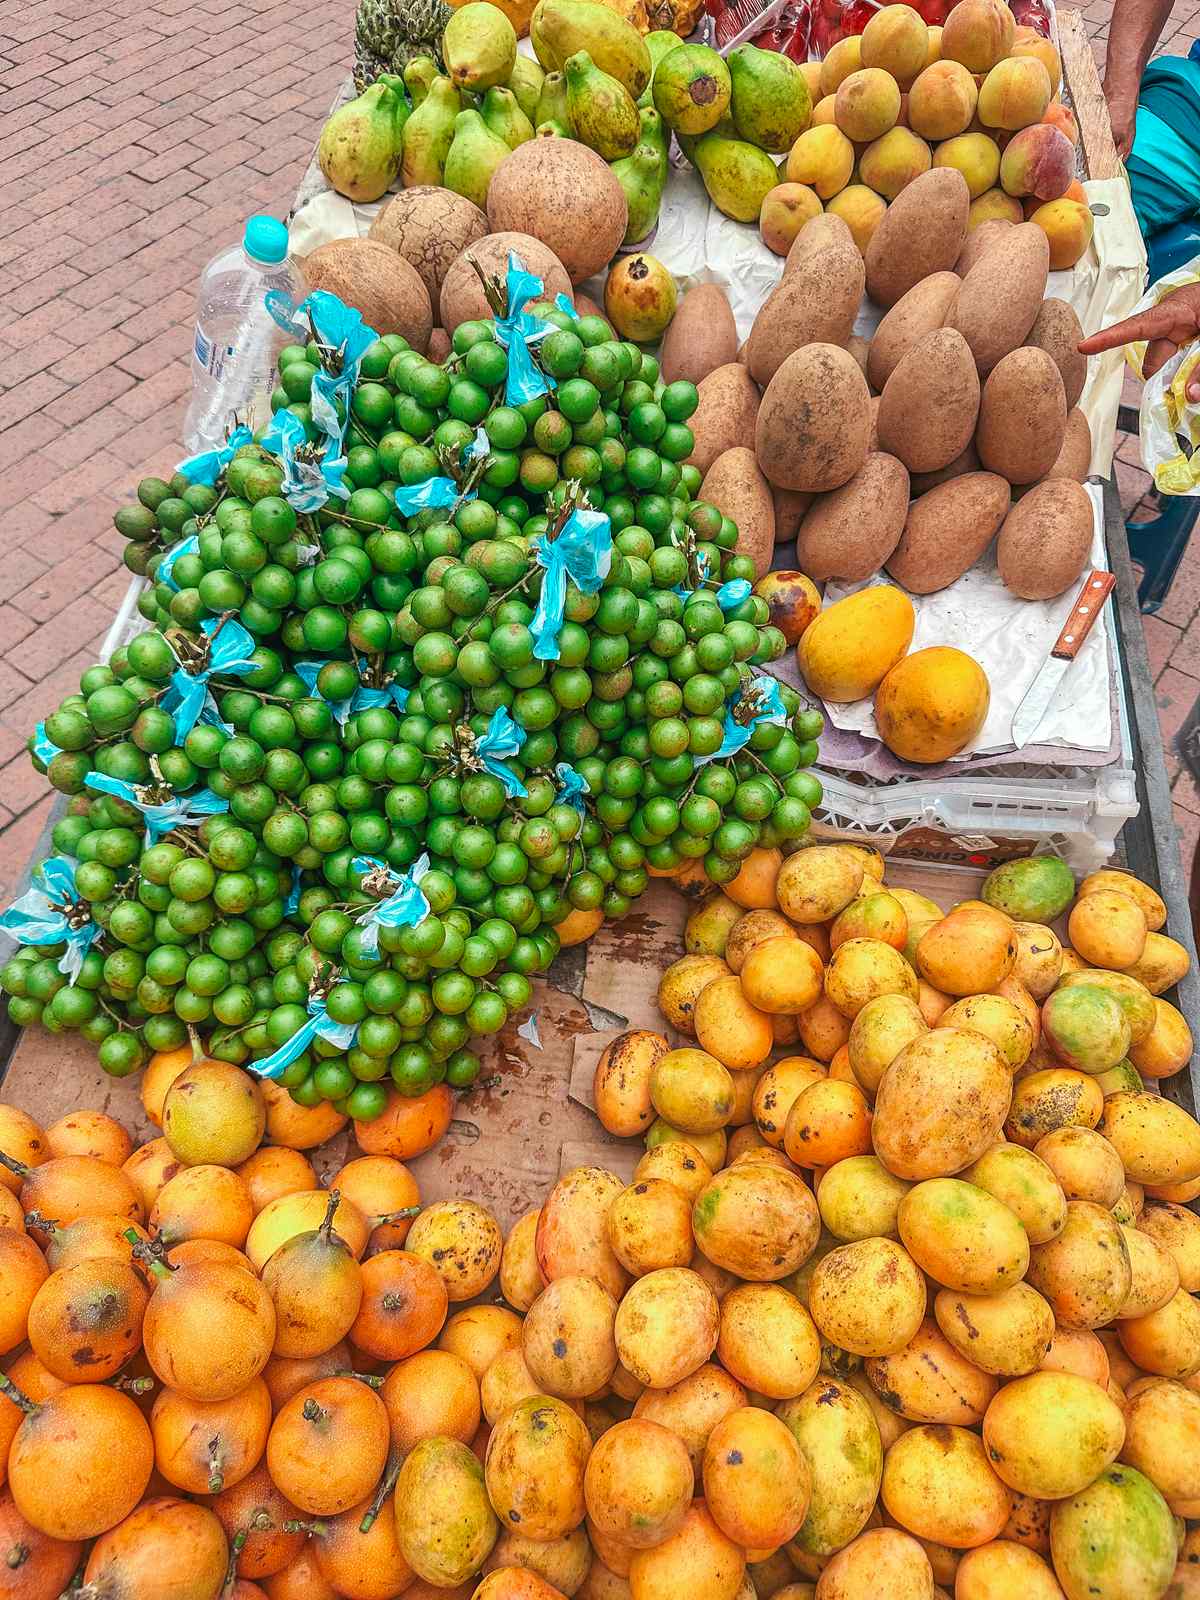 Local fruit in Cartagena Colombia